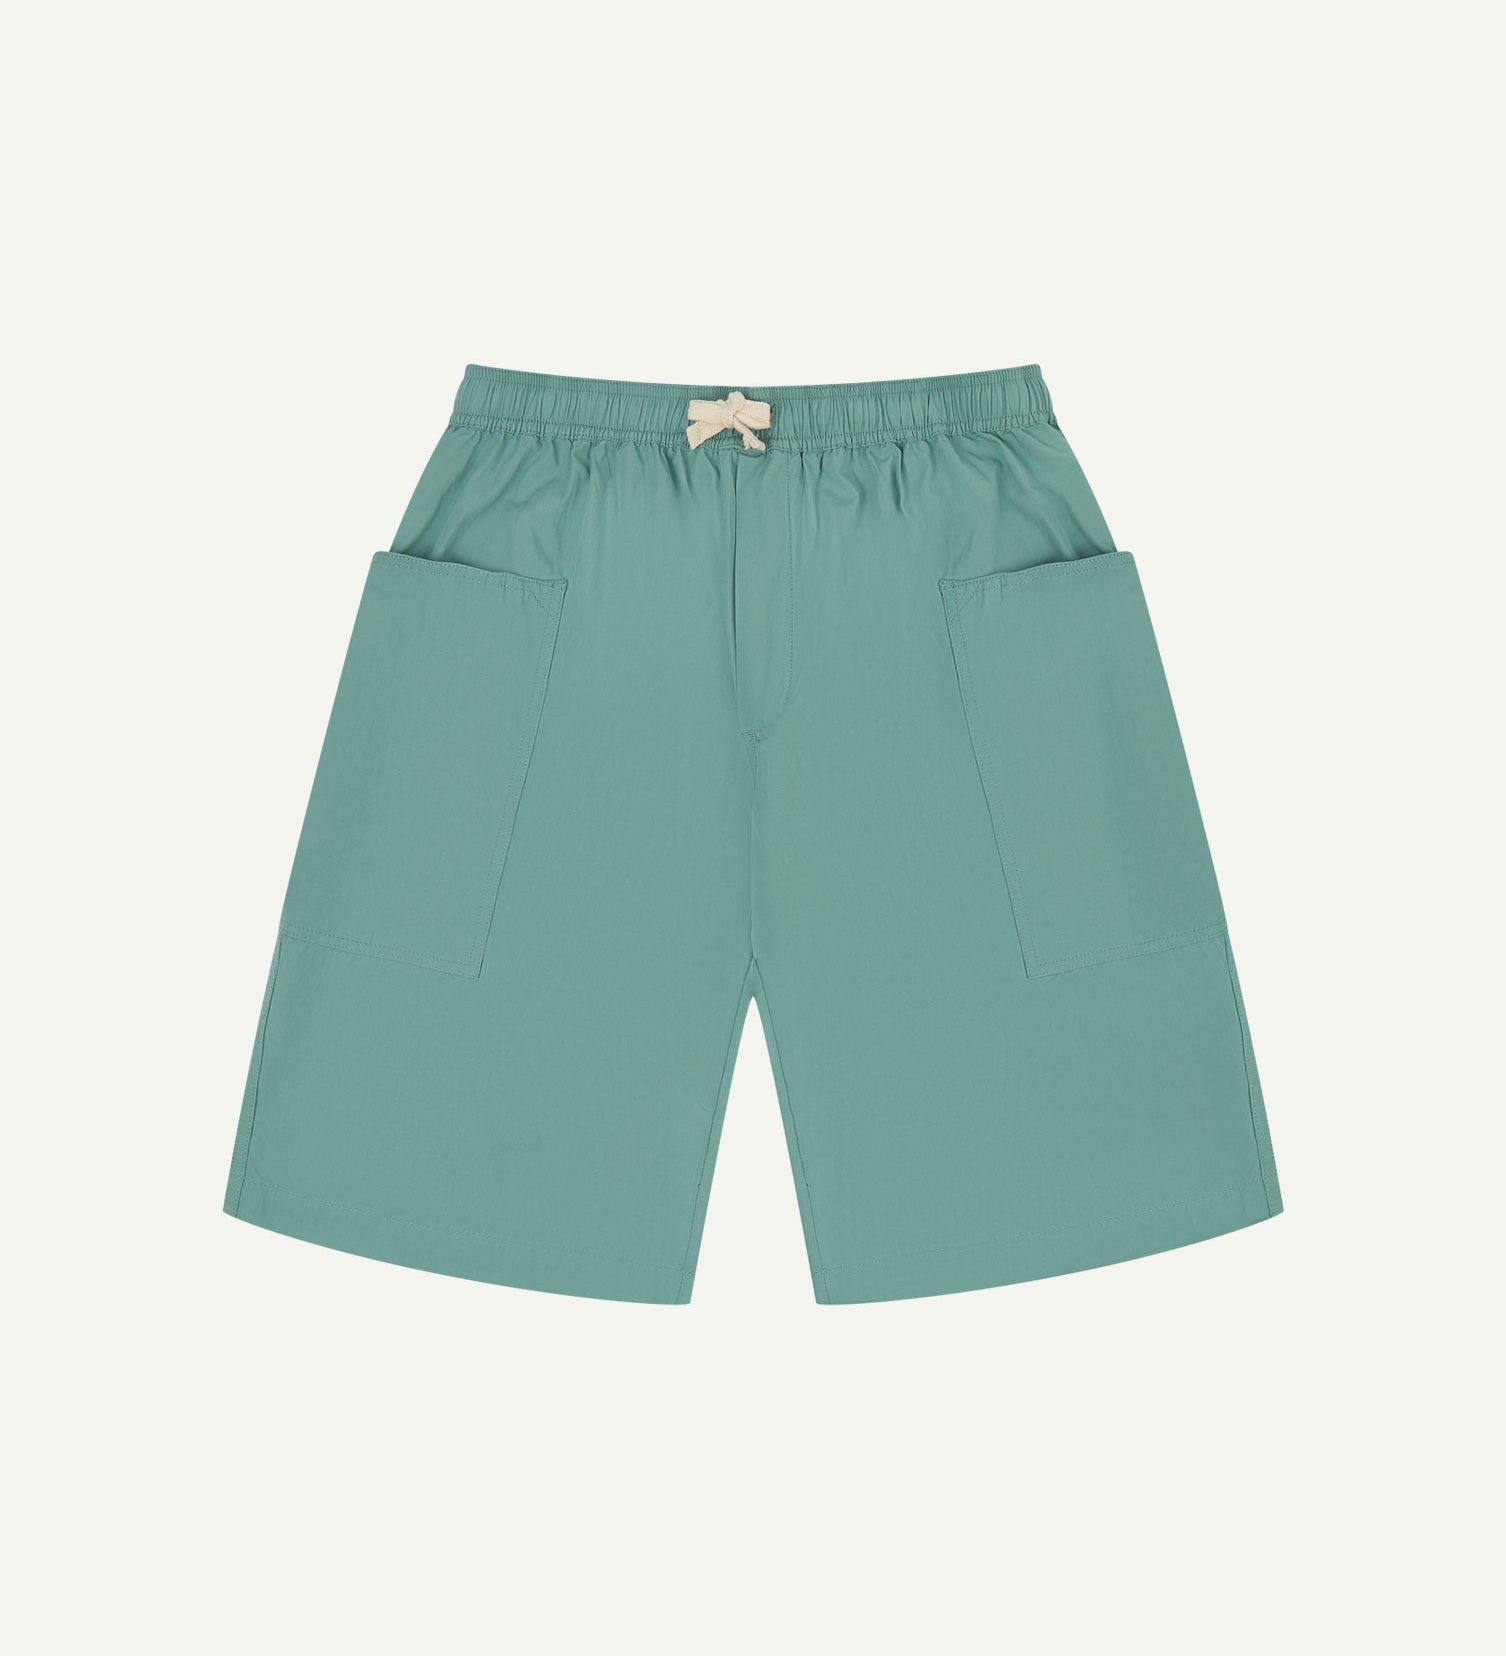 Front flat view of eucalyptus-green organic cotton #5015 lightweight cotton shorts by Uskees. Clear view of drawstring and deep front pockets.